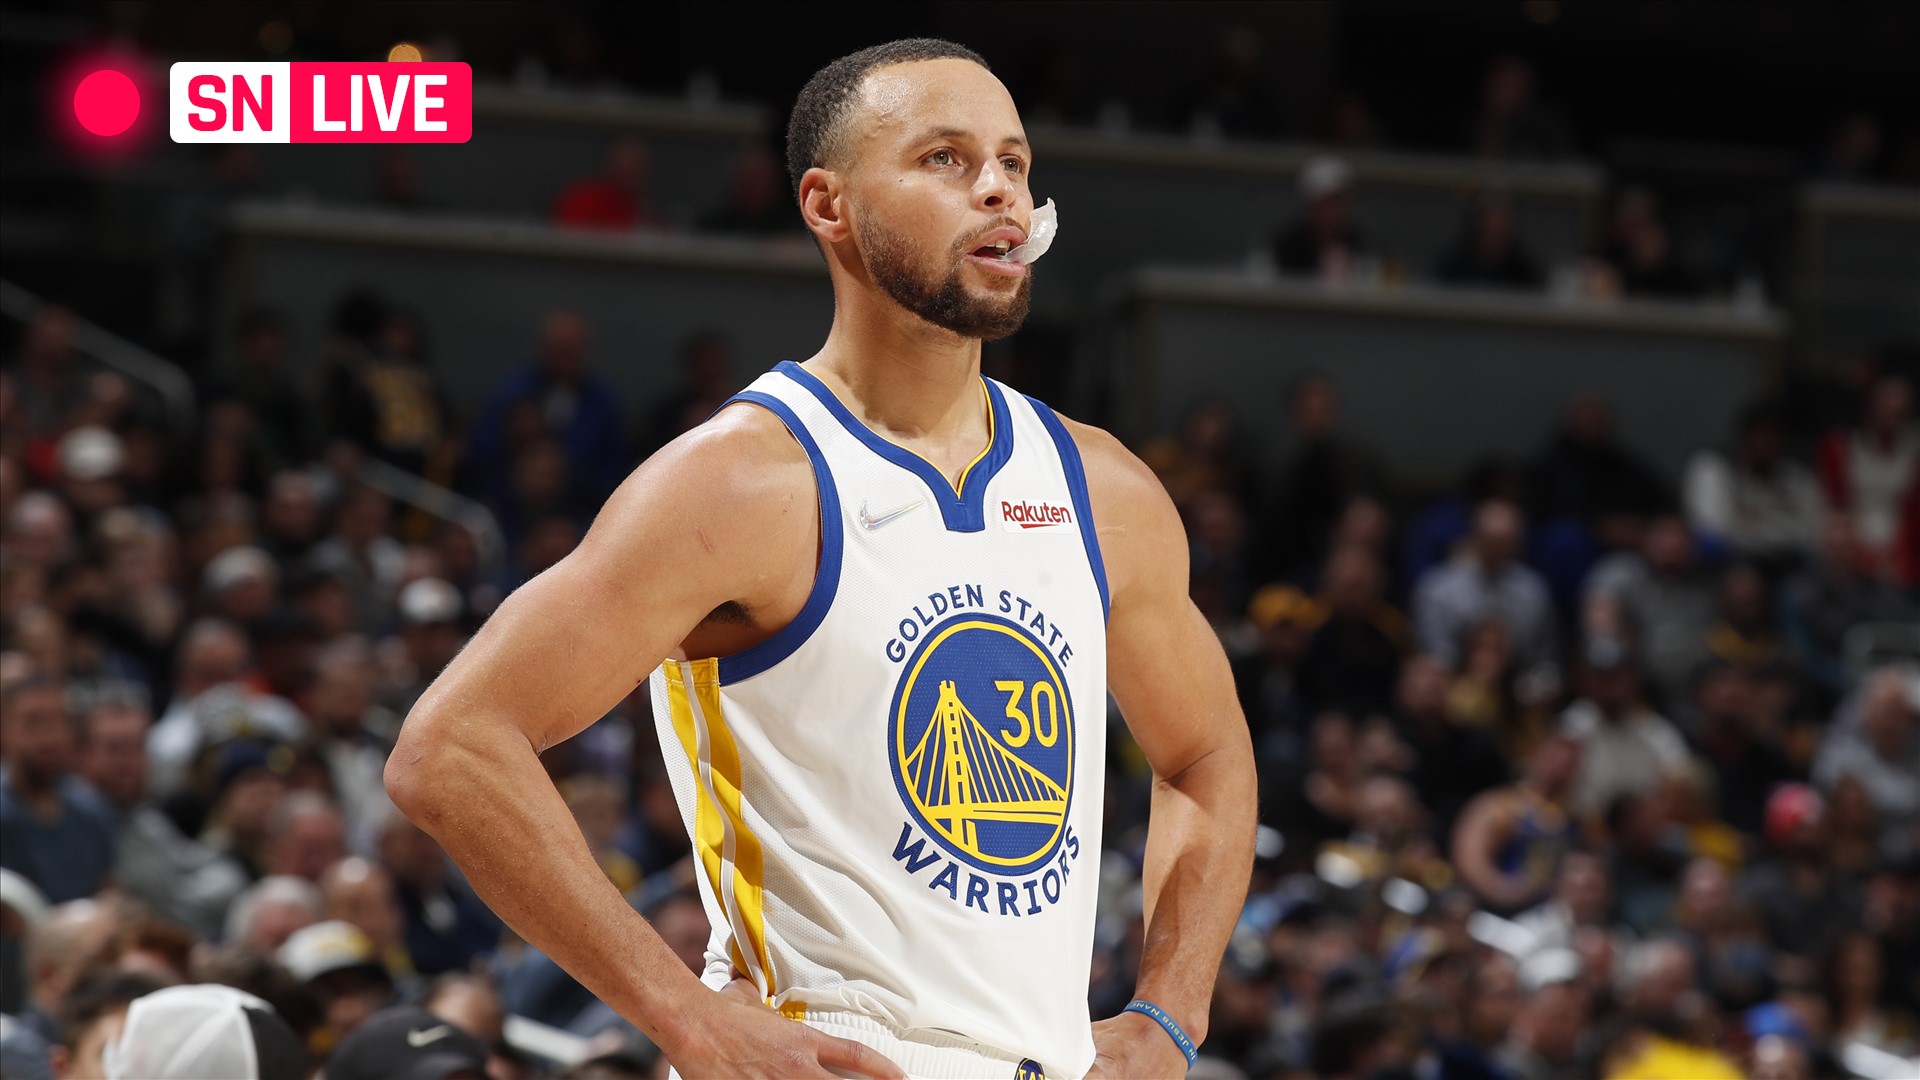 Stephen Curry 3-point record tracker: Live score, stats, updates, highlights from Warriors vs. Knicks